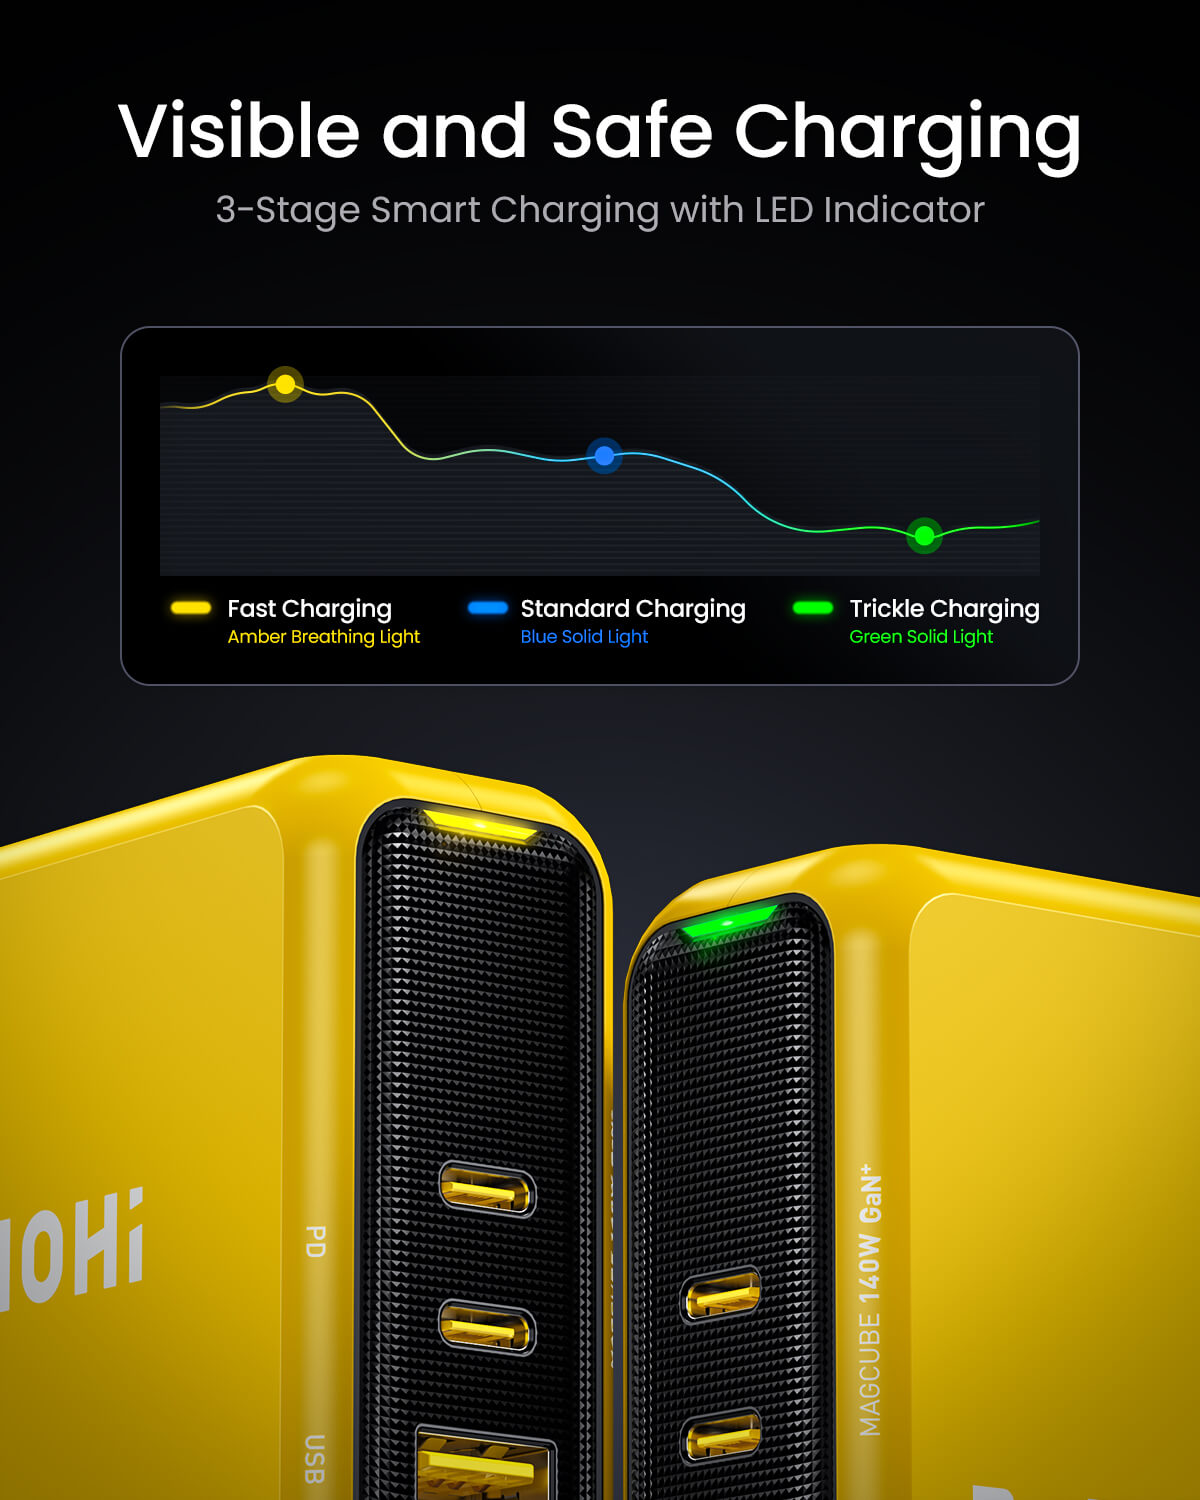 Pd 100W Portable Powerbank Super Fast Charging Quick Charge Flash Charge -  China Power Bank and Portable Charger price